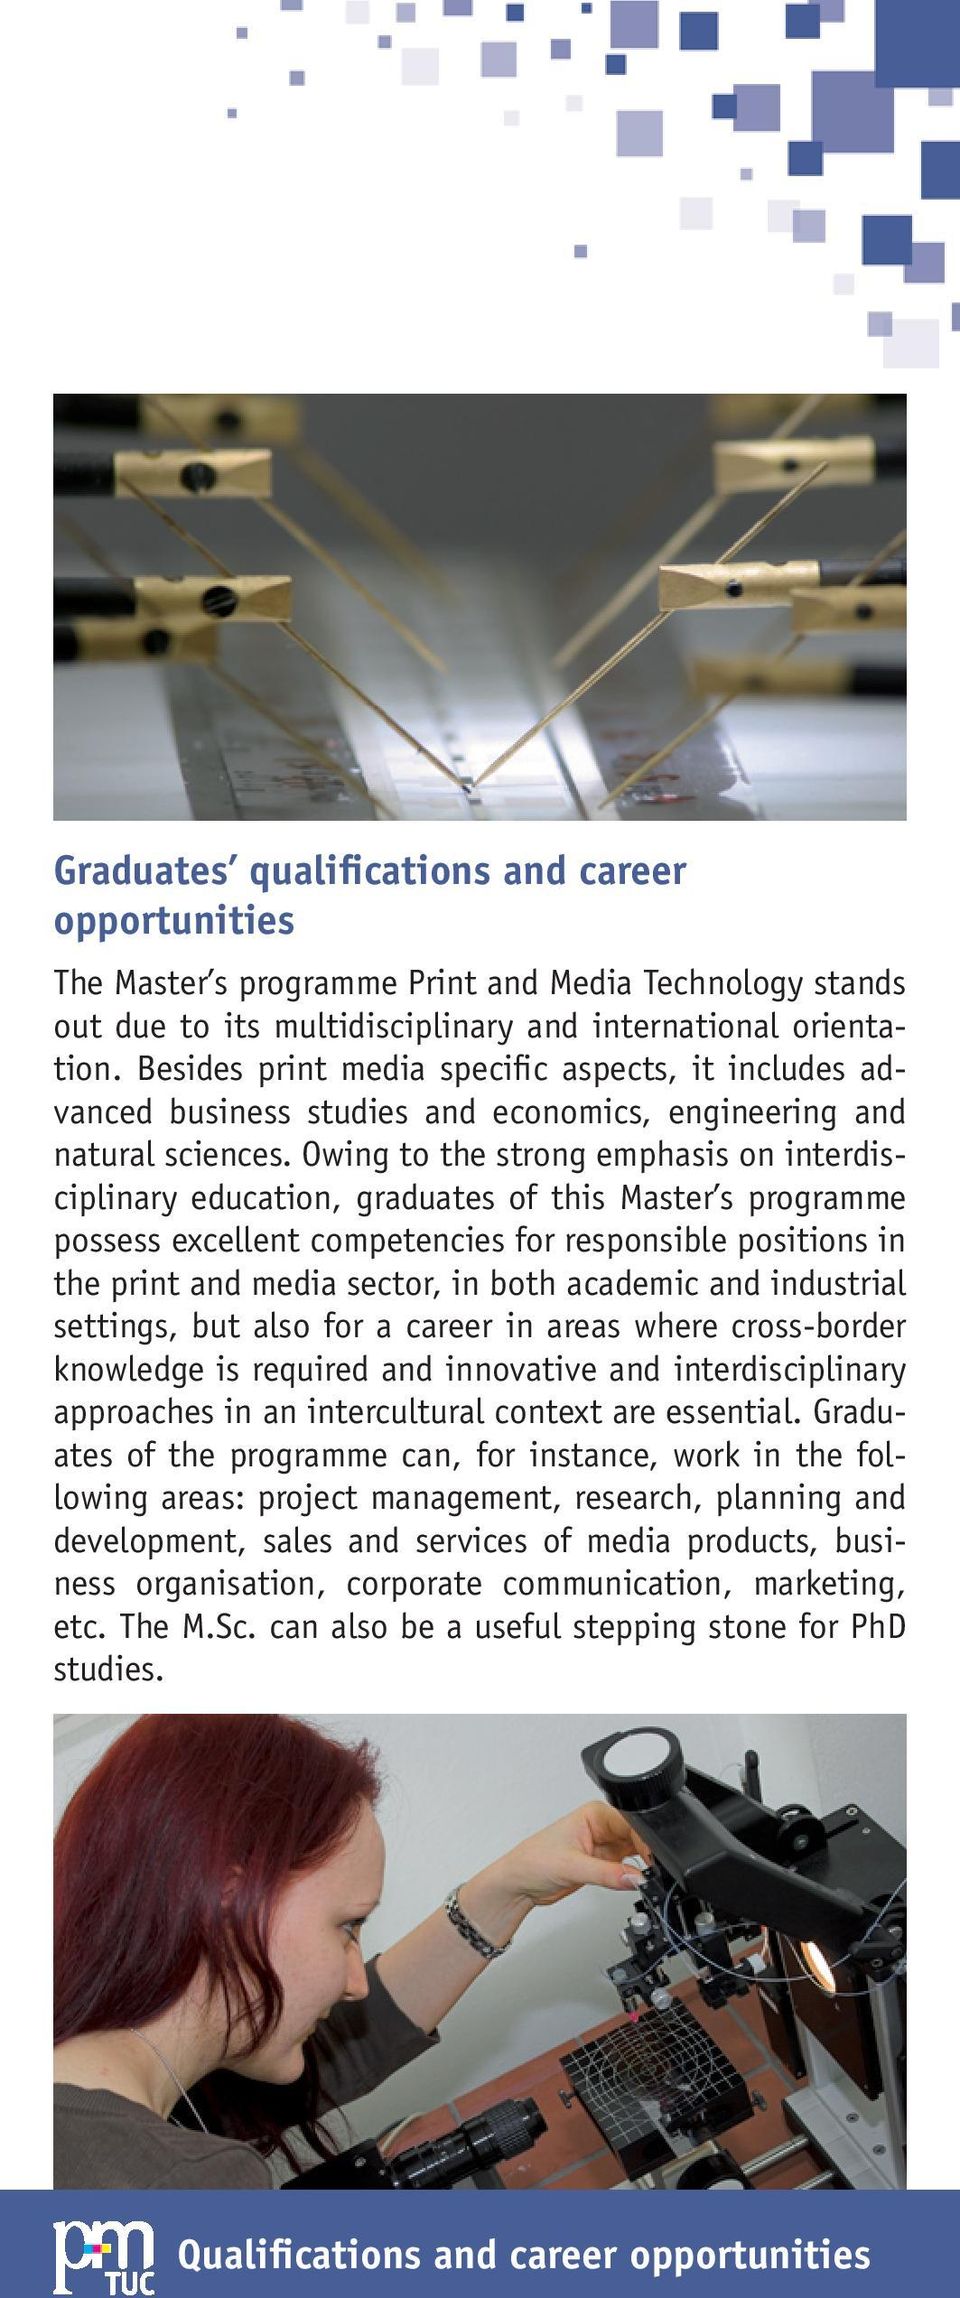 Owing to the strong emphasis on interdisciplinary education, graduates of this Master s programme possess excellent competencies for responsible positions in the print and media sector, in both